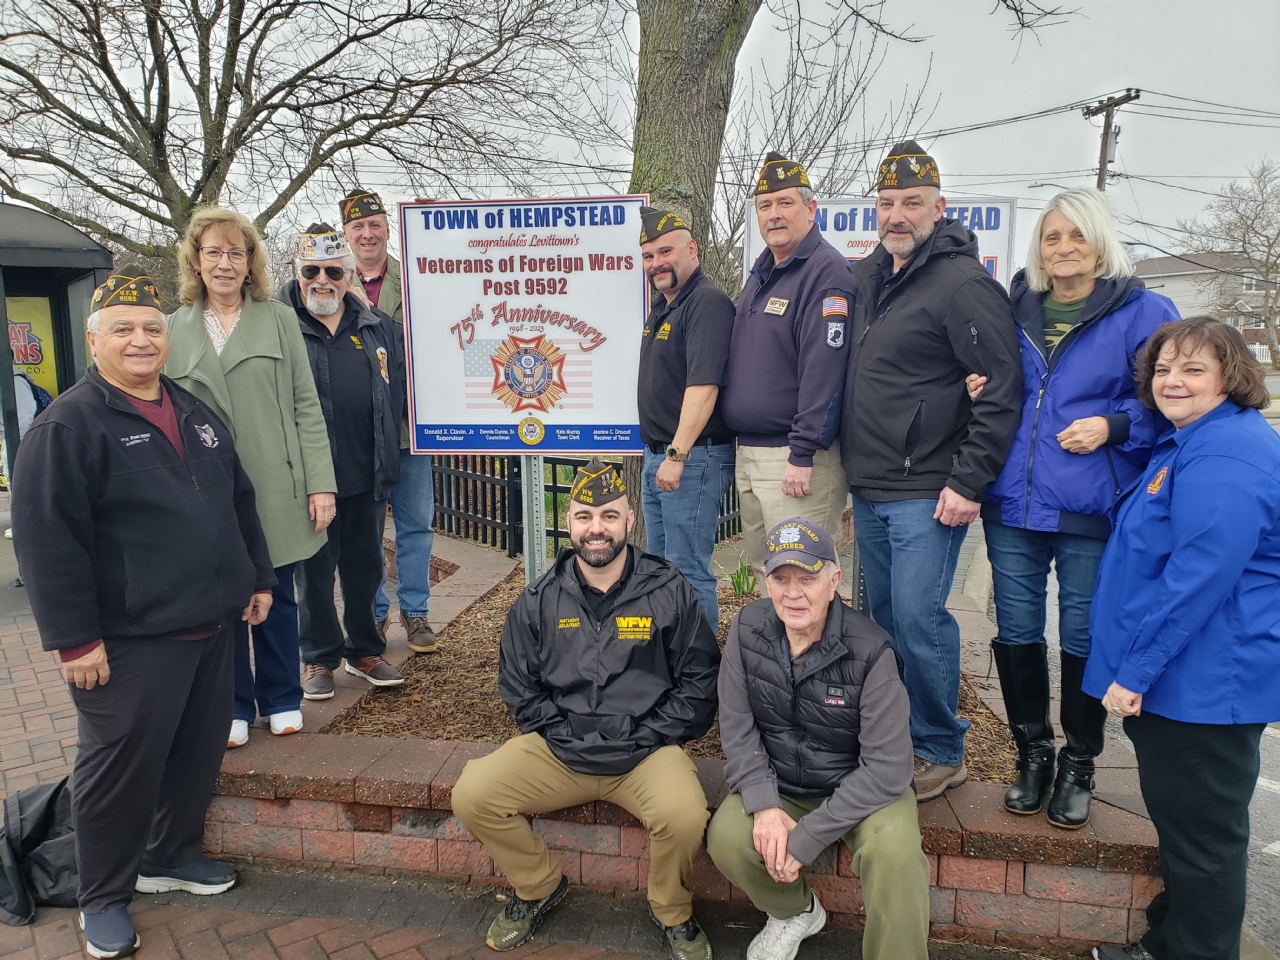 Unveiling of the Town of Hempstead road sign celebrating VFW Post 9592's 75th Anniversary.